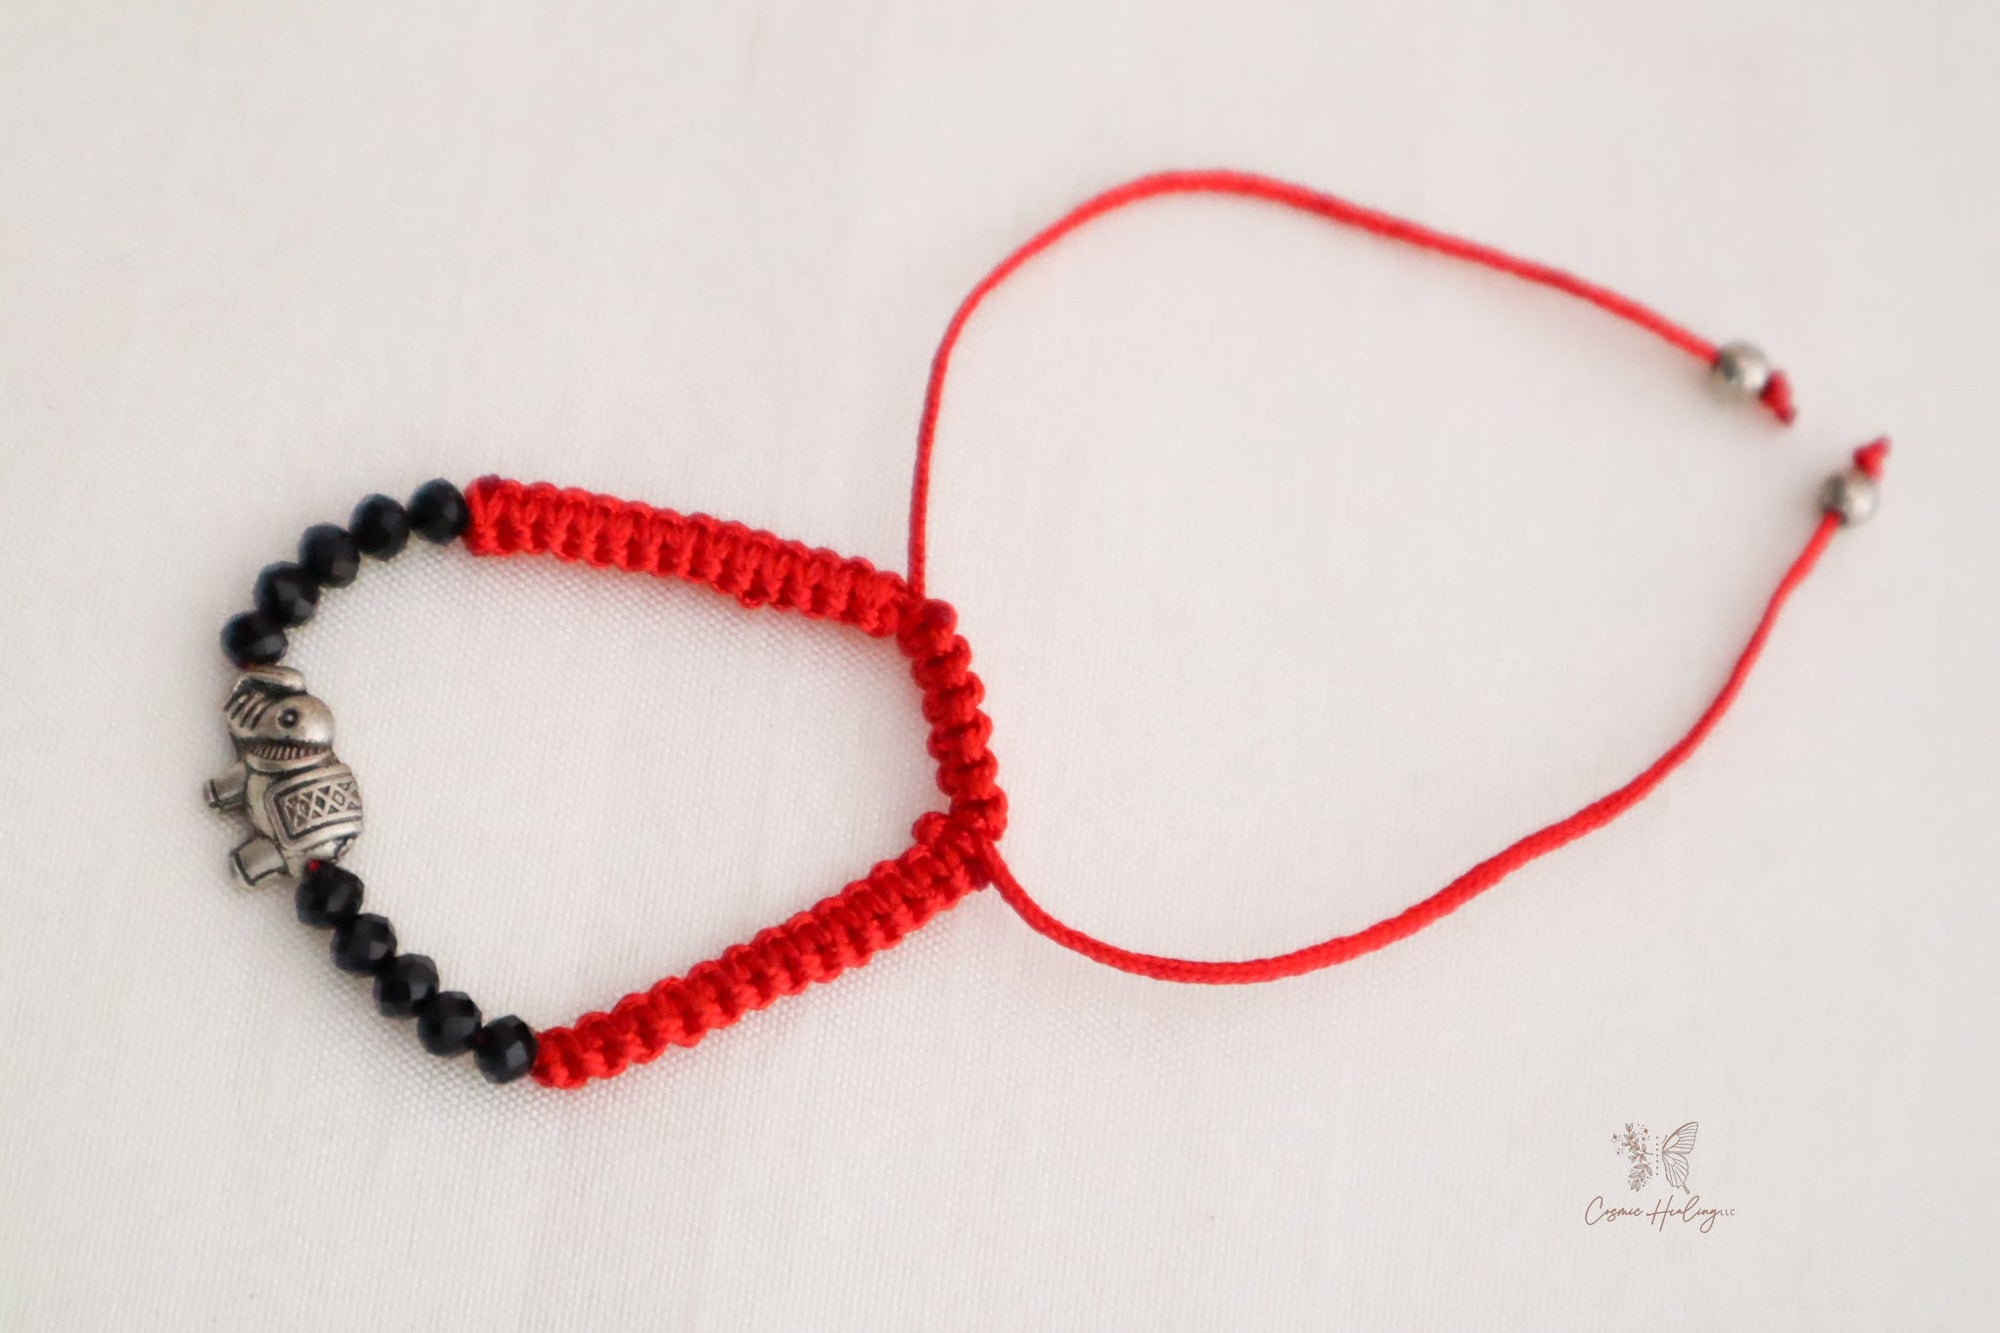 Red Cord Lucky Elephant Bracelet Adjustable Knot Black Silver Beads - Shop Cosmic Healing